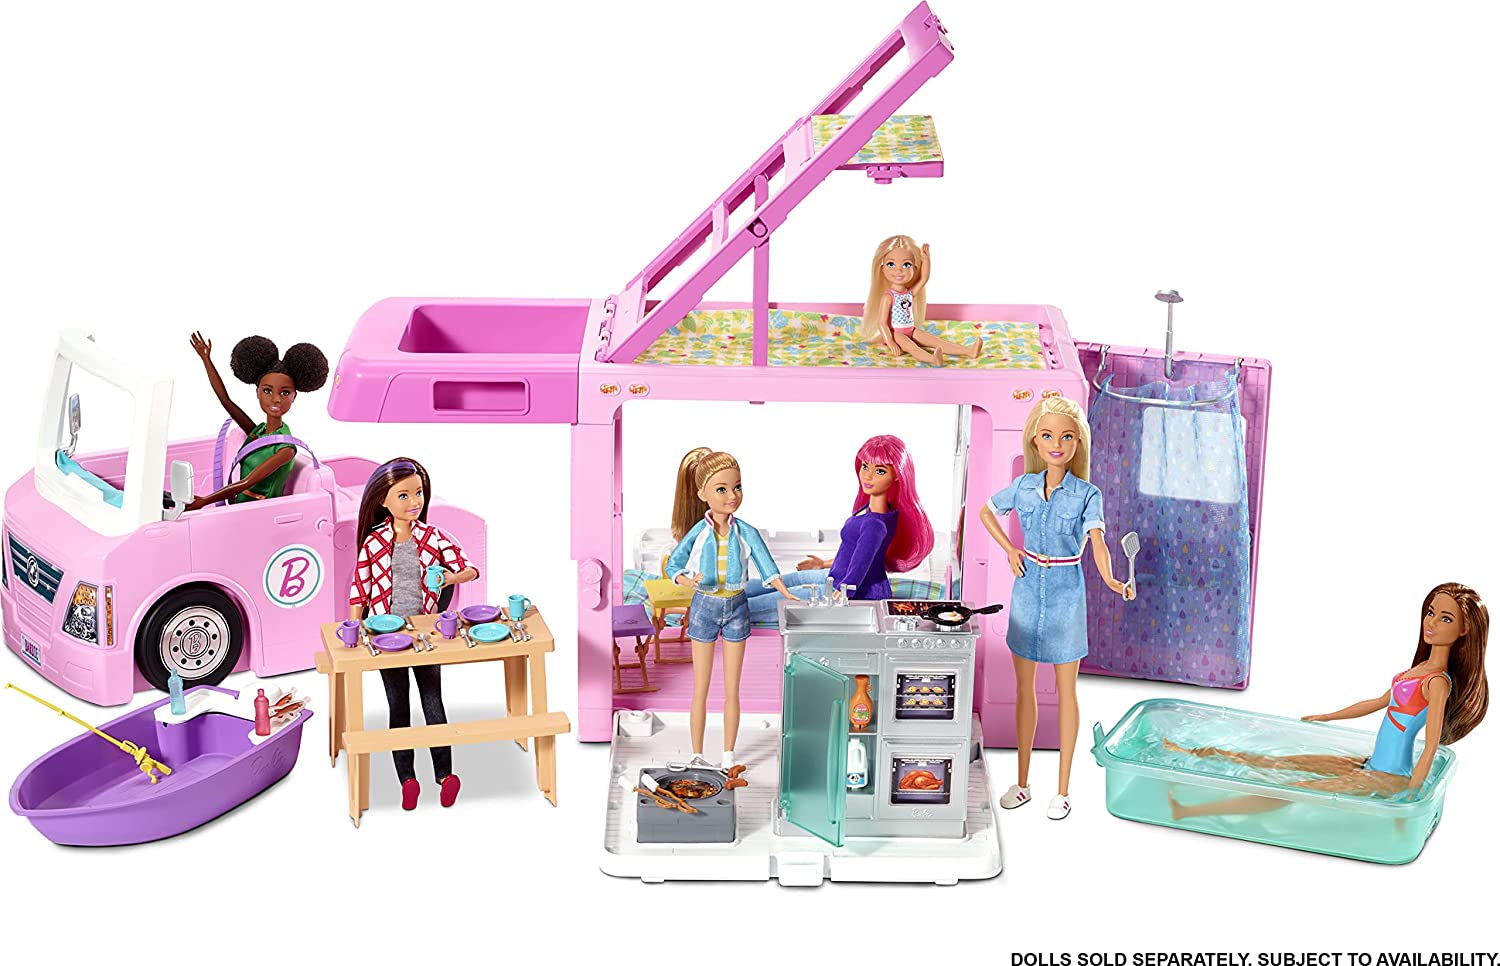 ​Barbie 3-in-1 DreamCamper Vehicle Amazon Black Friday Deal!